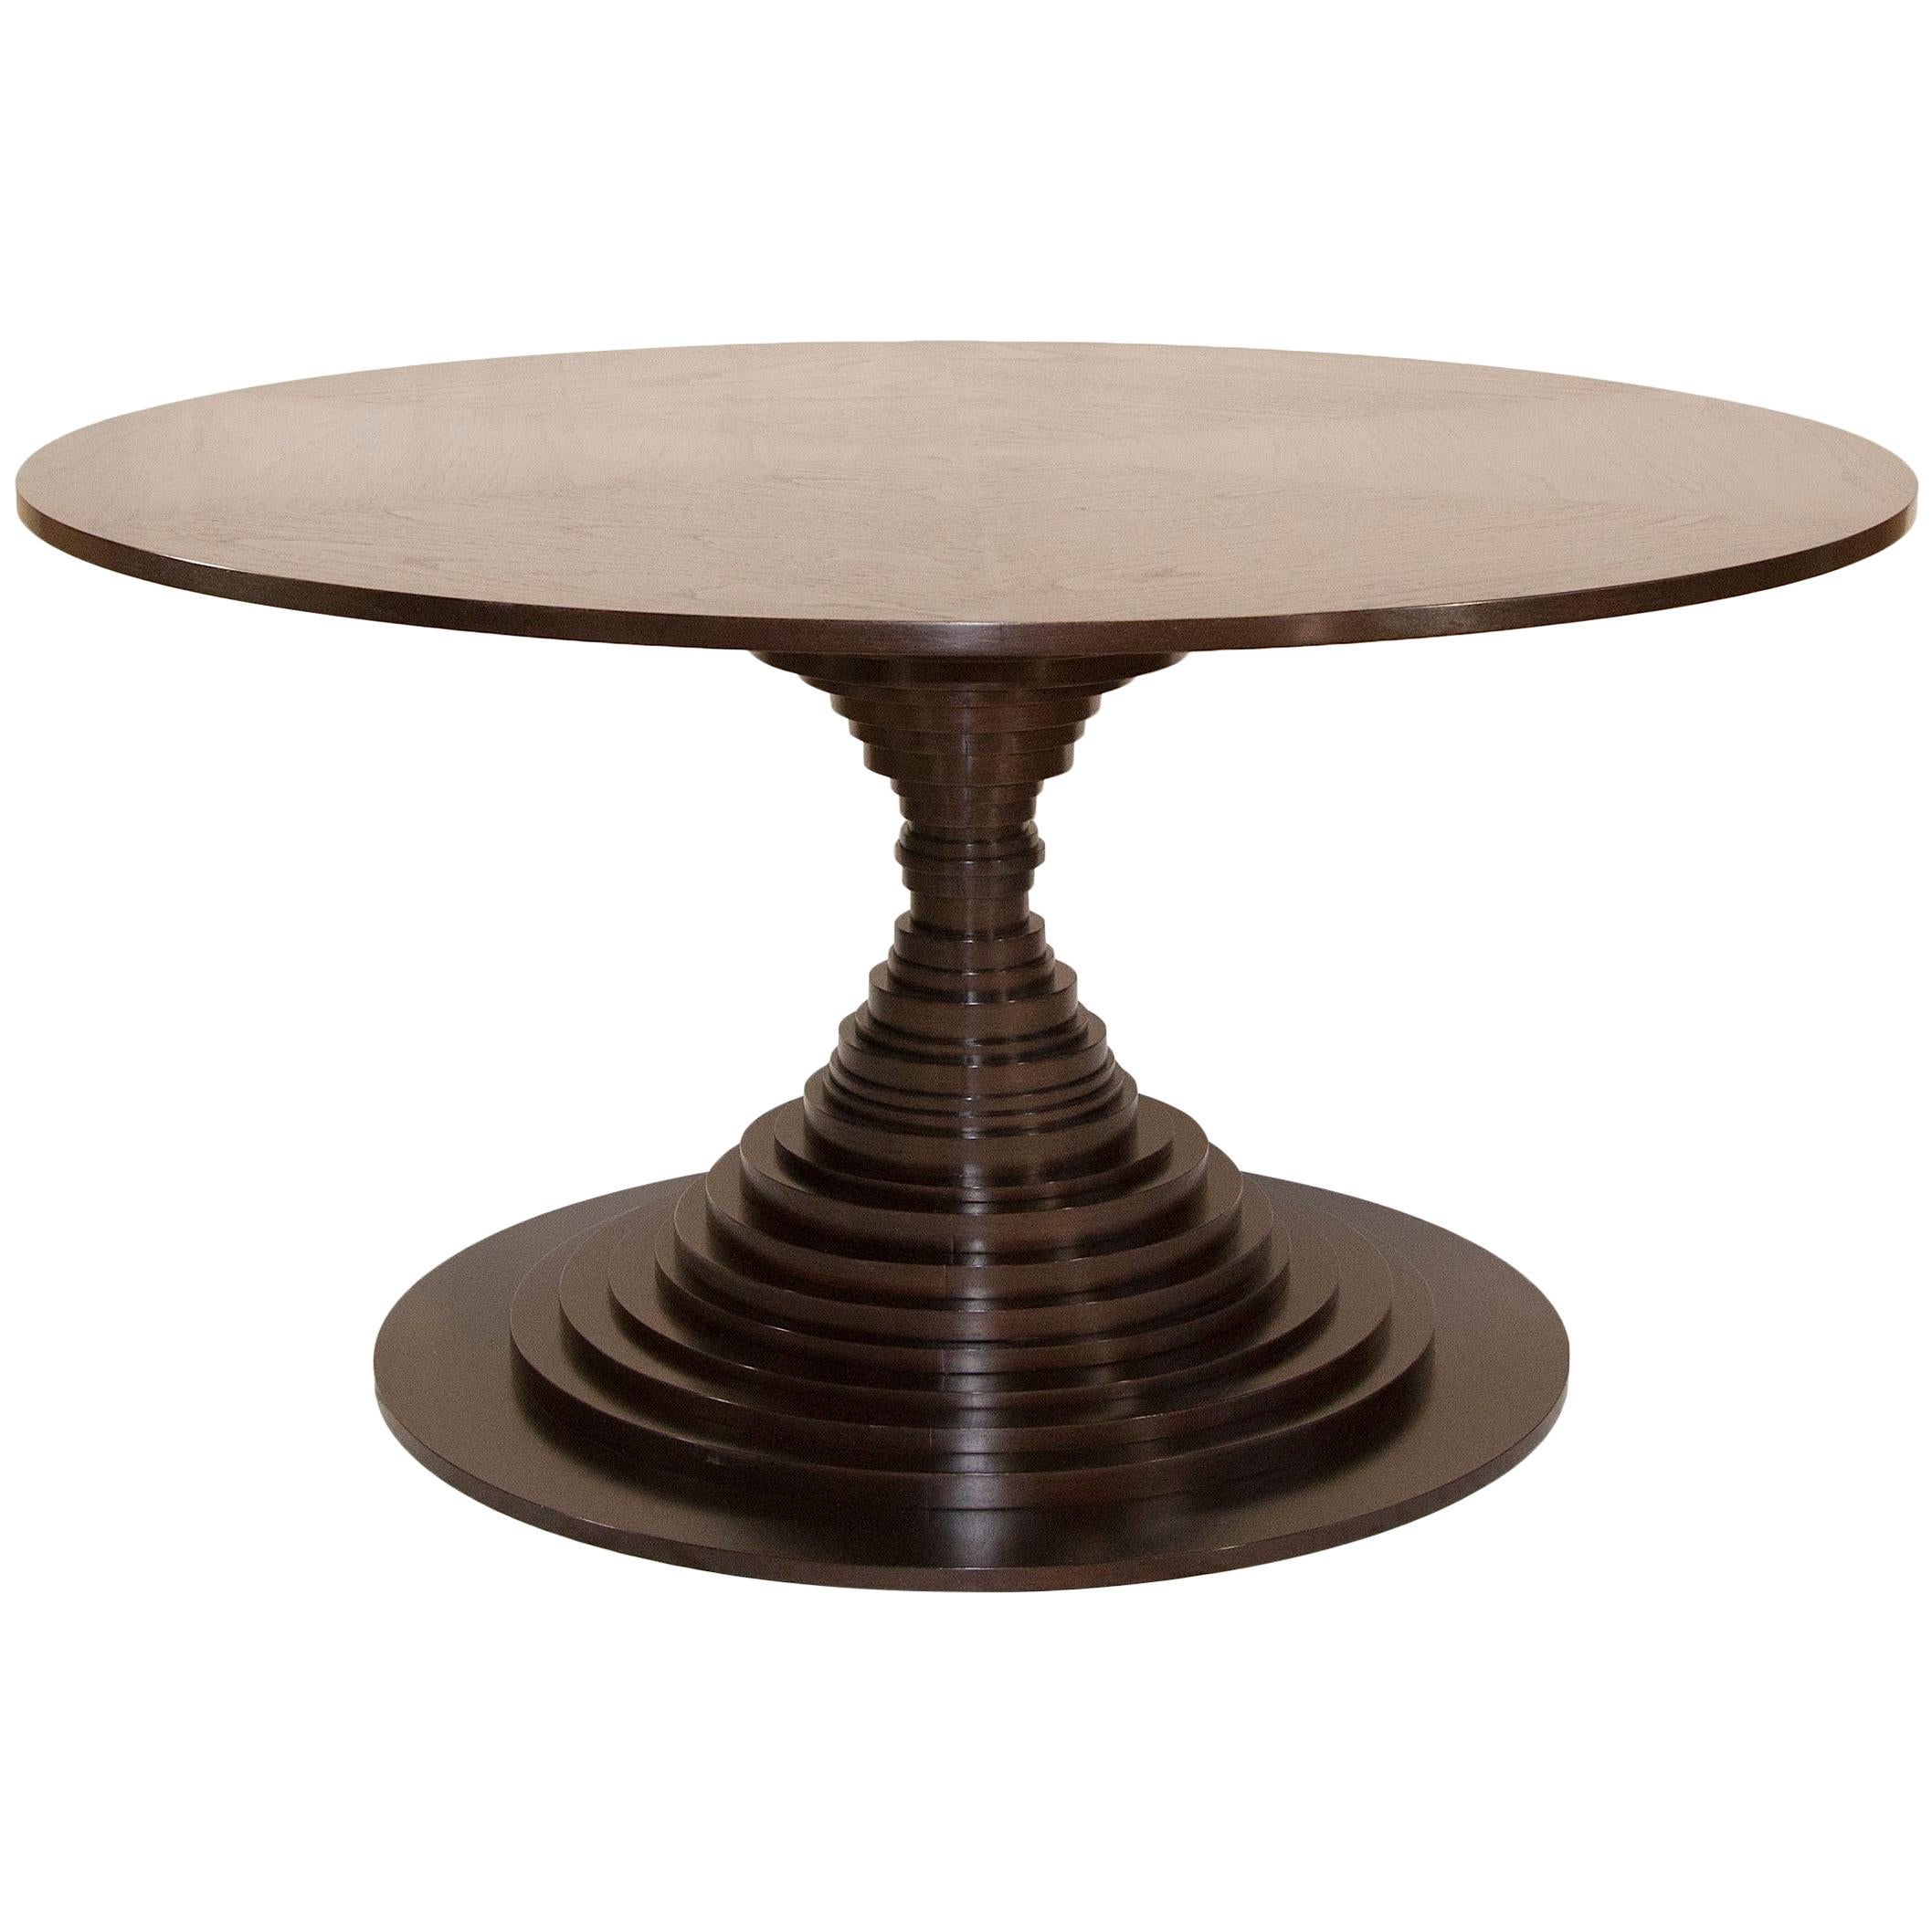 A handcrafted dining or center table. It is artfully composed of 33 individual discs. The impressive top is constructed of multiple sections of walnut or rosewood veneer creating an extraordinary Sunburst pattern. The table is engineered with